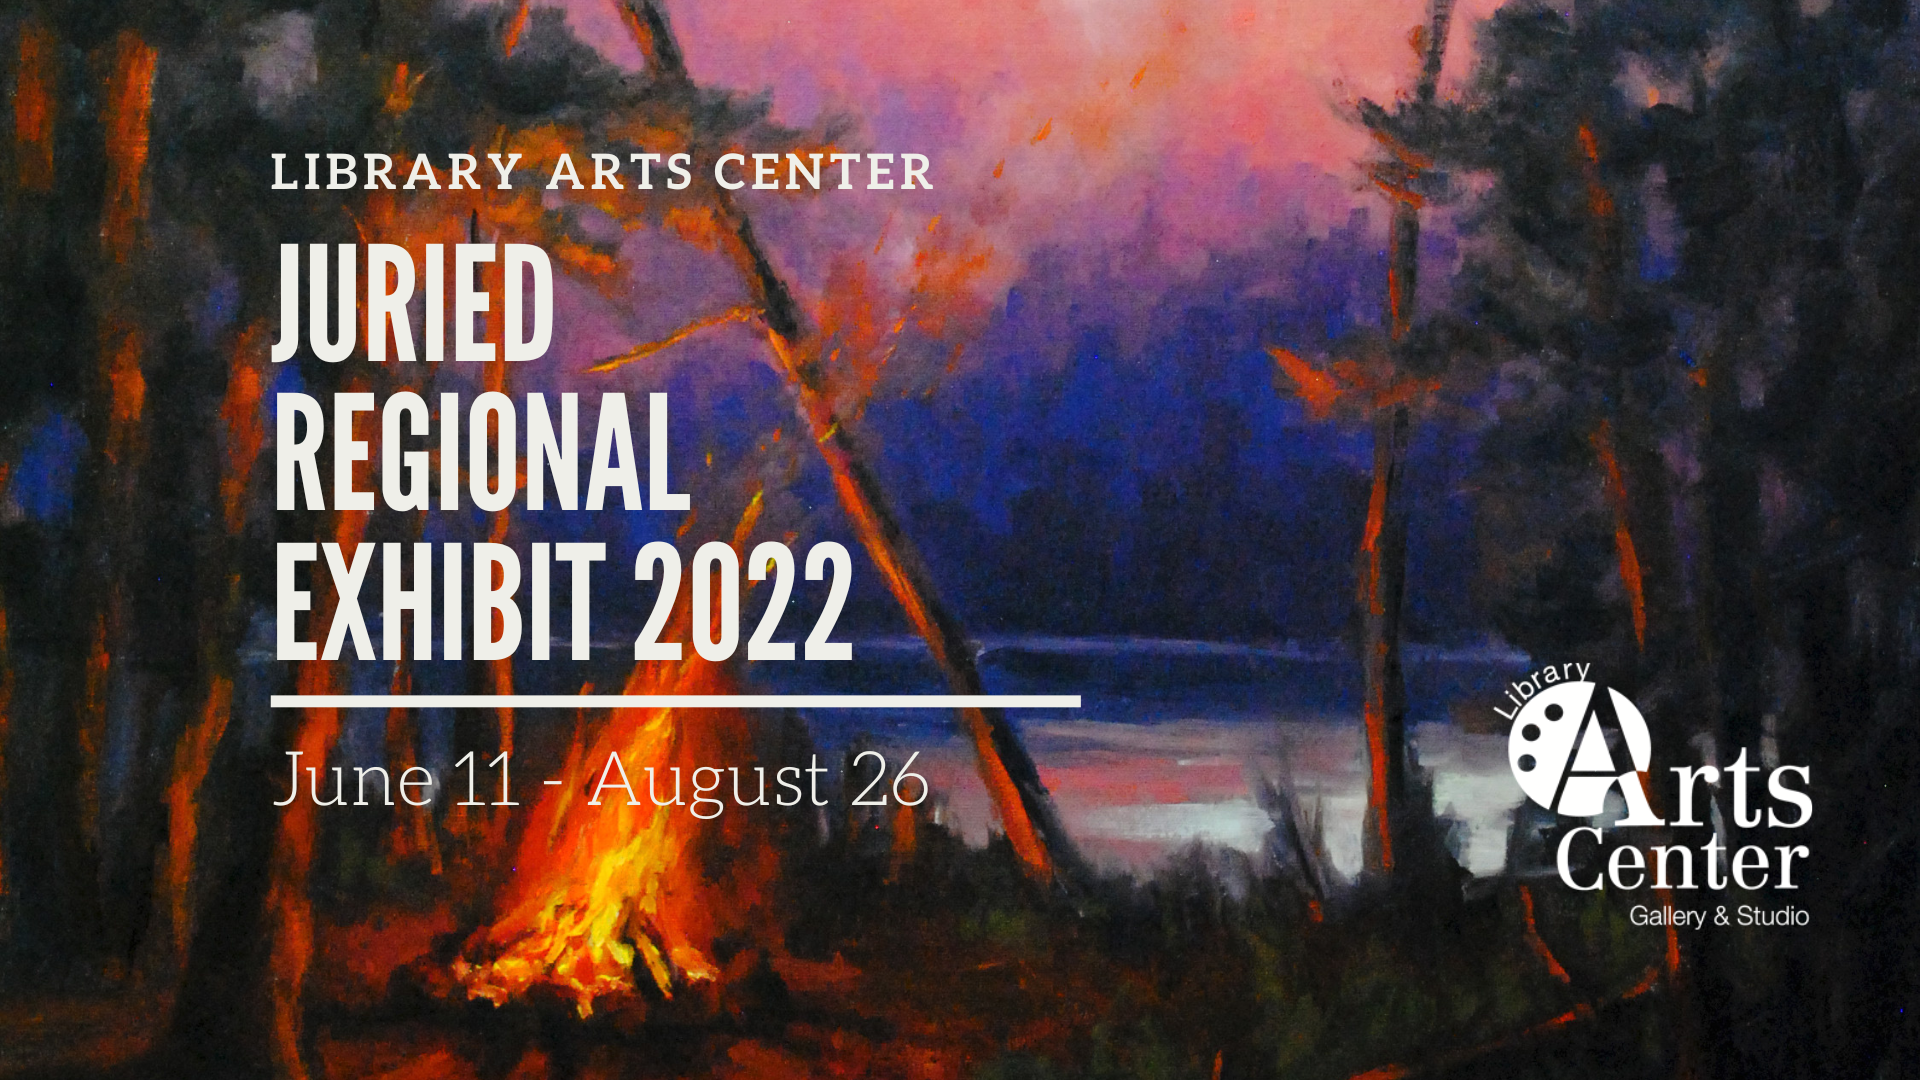 On Exhibit: June 11 - August 26th  We invite you to join us for the exhibit's Opening Reception: ﻿Friday, June 10th, 5-7pm Light refreshments will be served.  This show features recent works by regional artists in a variety of mediums.  2022 Jurors:  Betsy Derrick Professional Artist  Jessica Gelter Executive Director, Arts Alive!